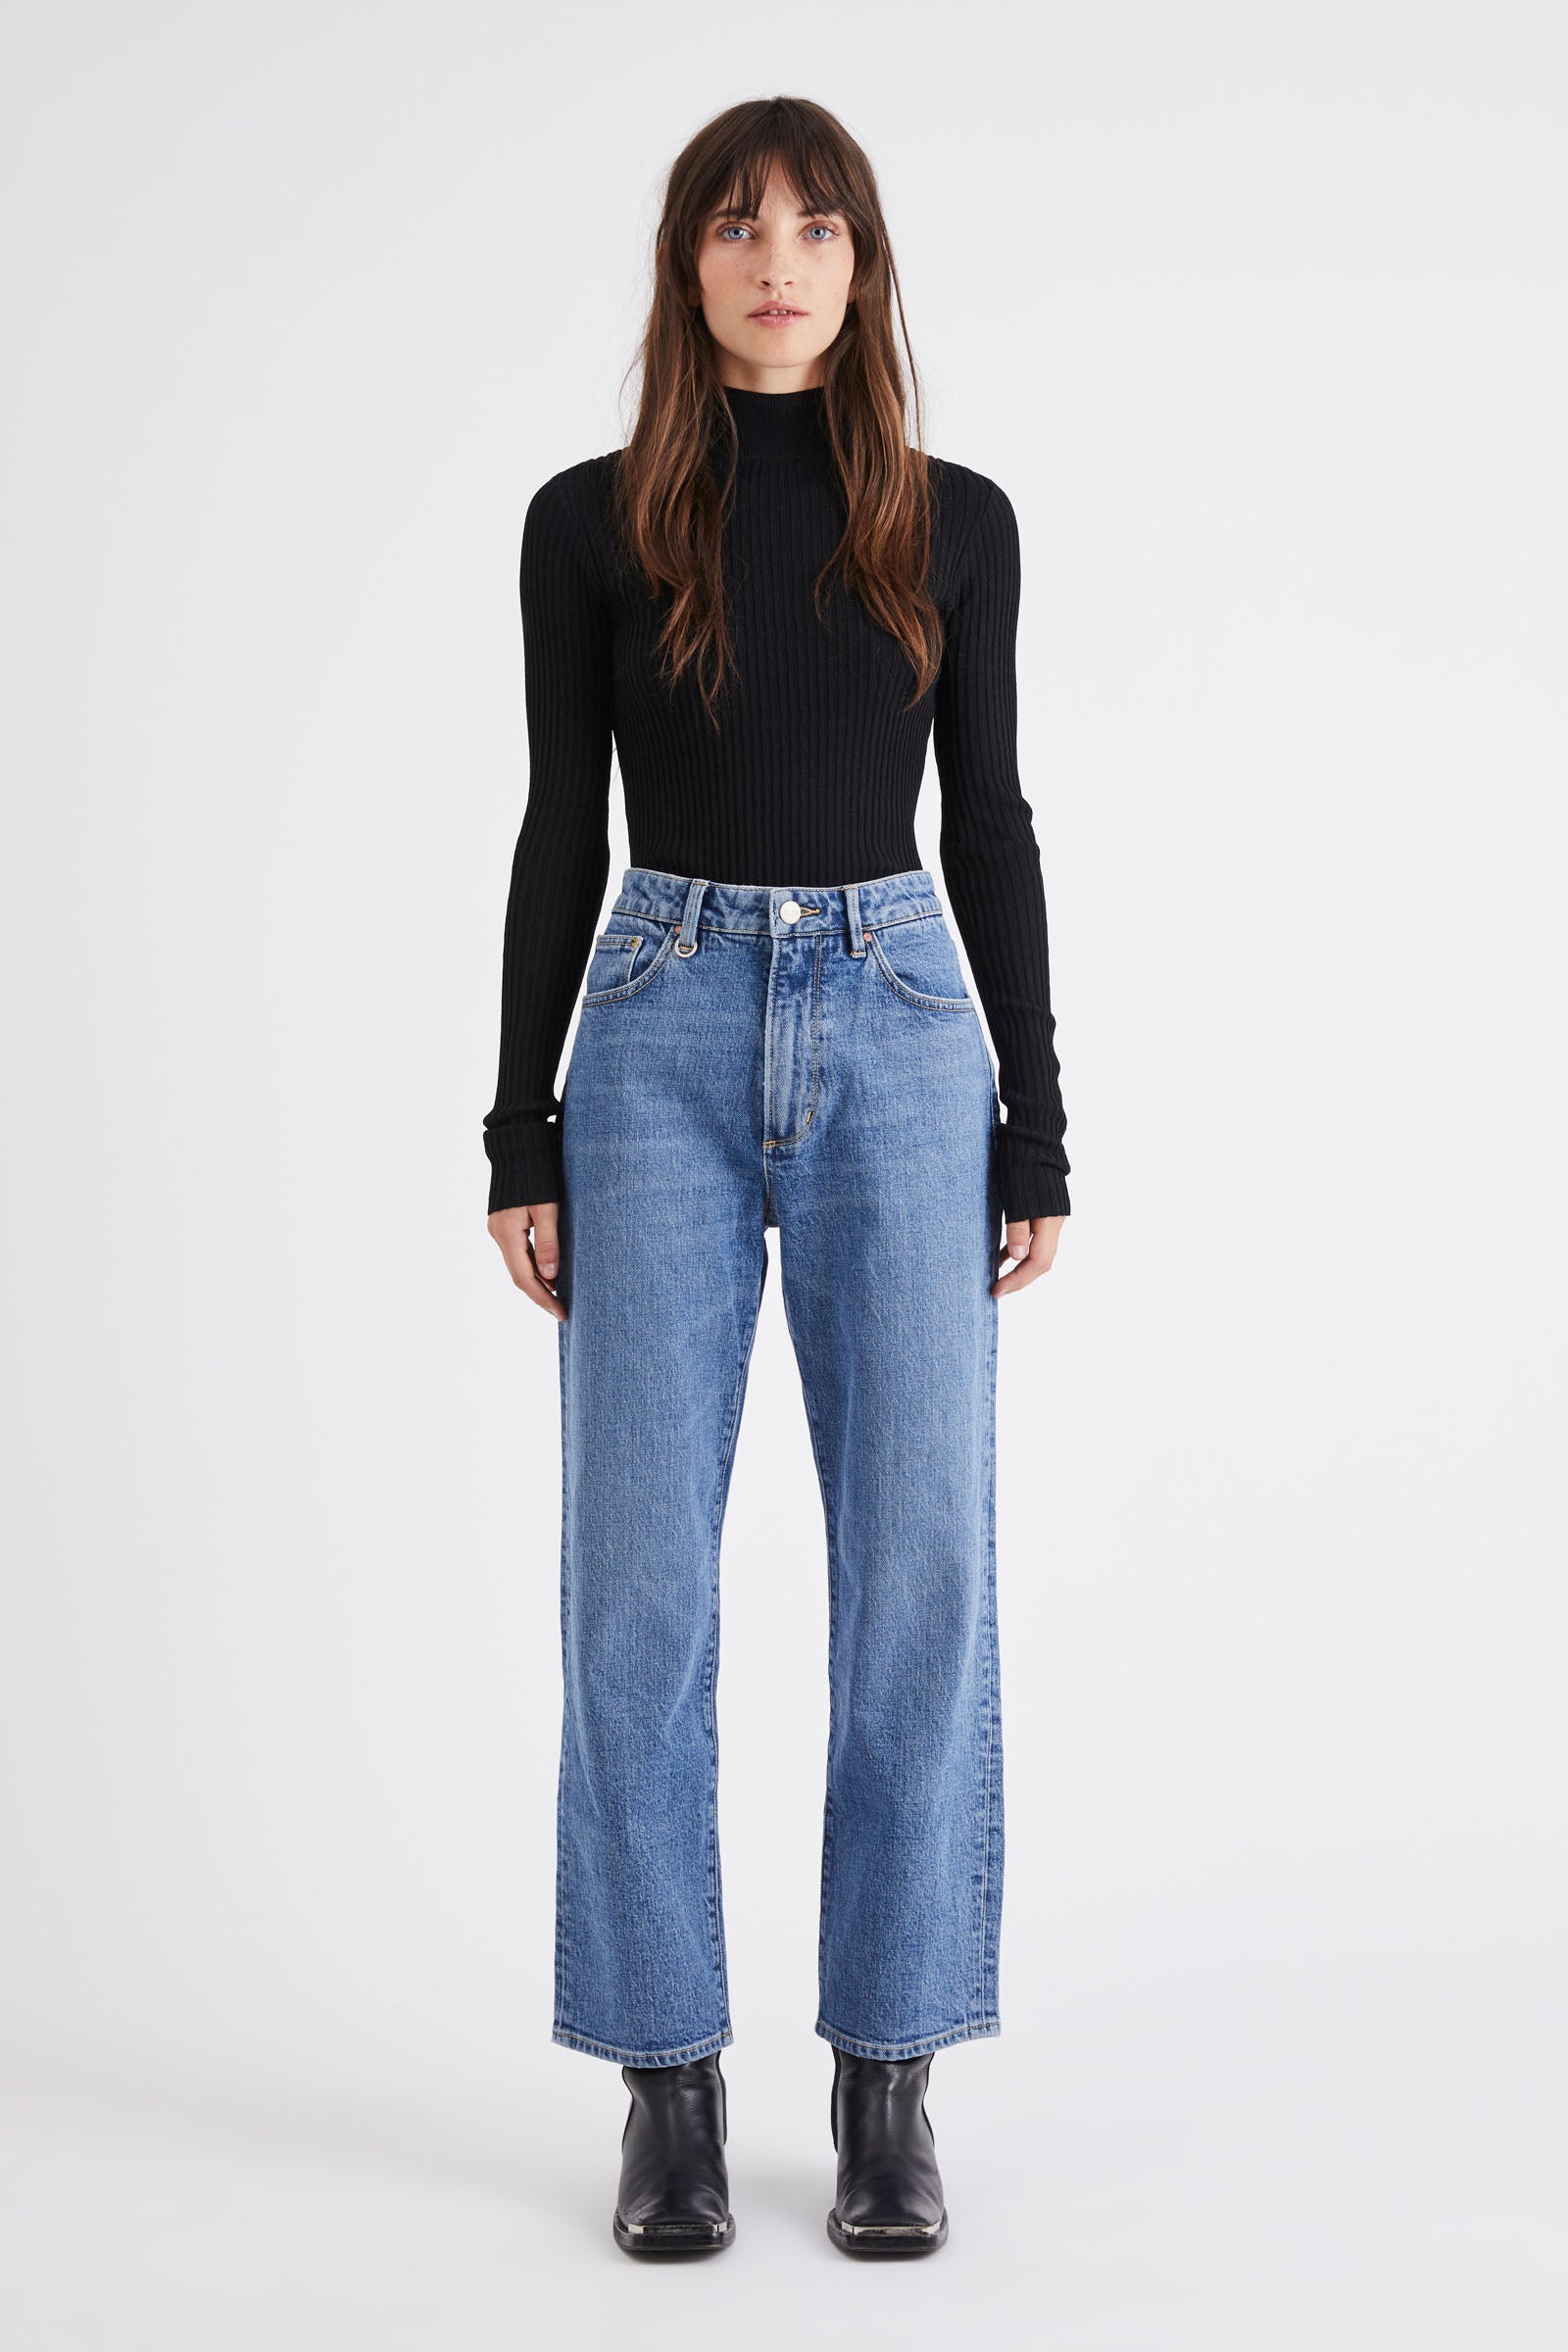 levi's relaxed fit women's jeans